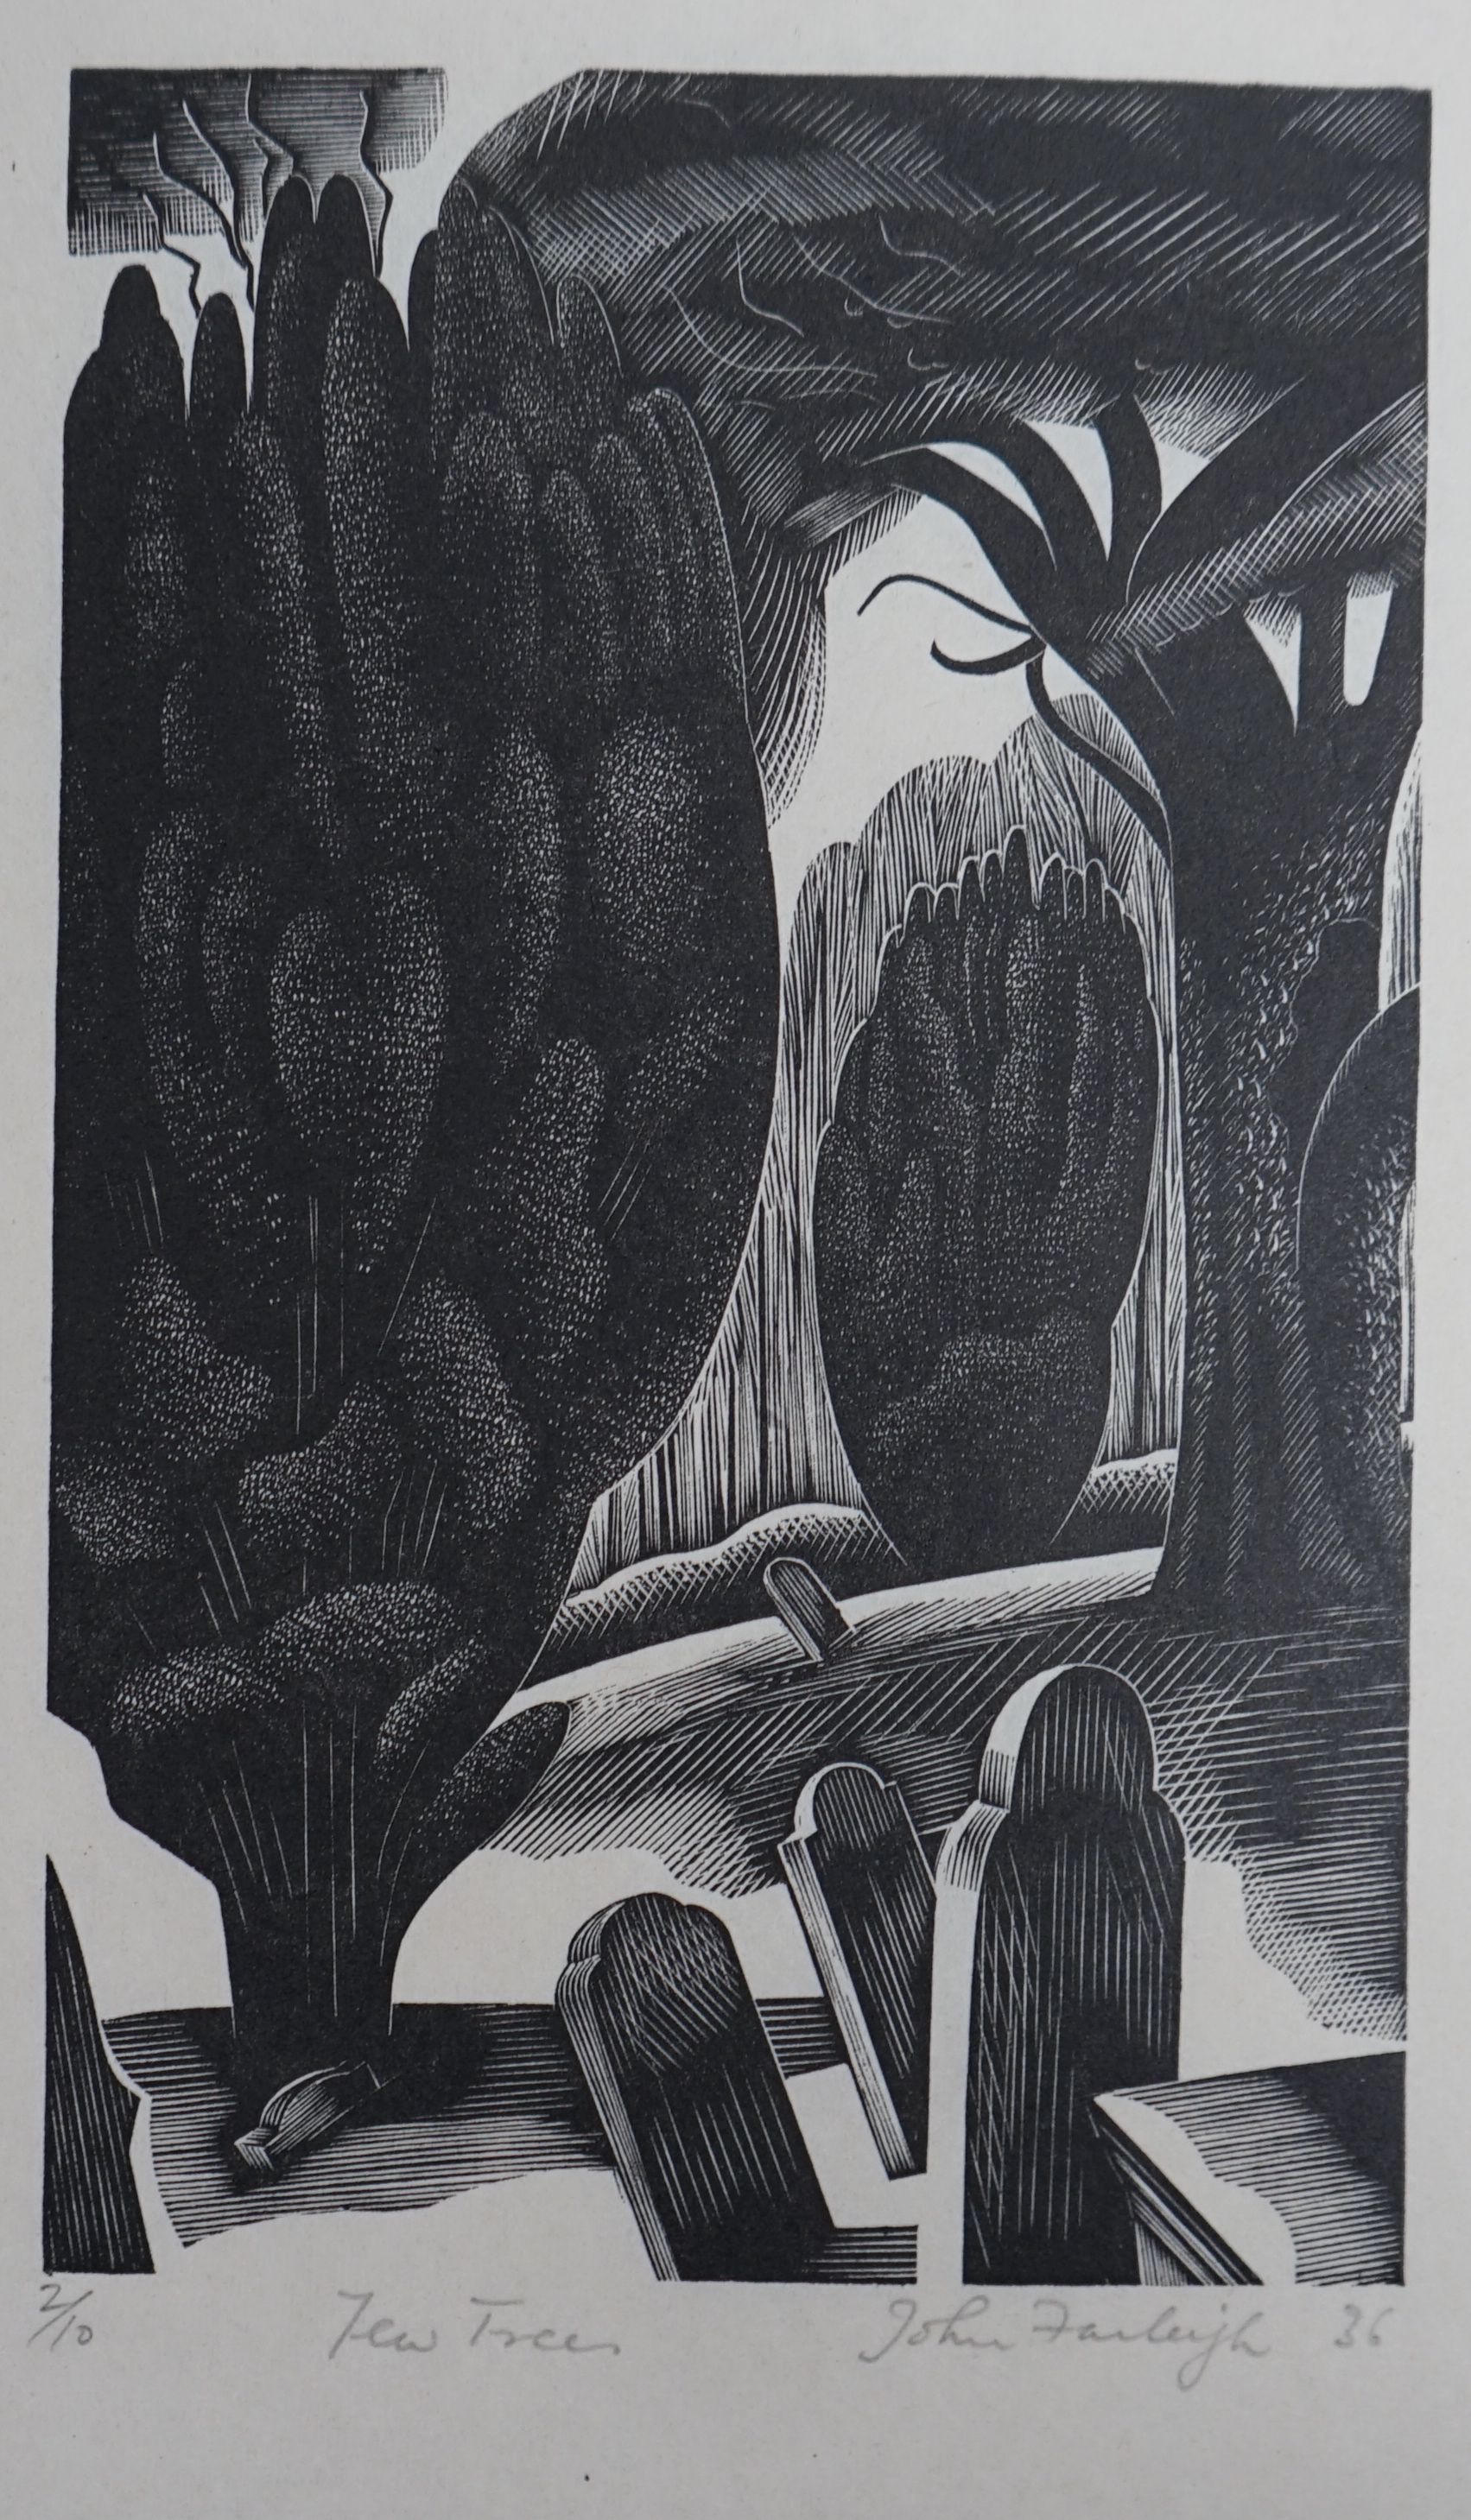 John Farleigh (1900-1965), four woodblock prints, Dhalia, Apples, Yew Trees and another Yew Trees, all numbered in pencil, largest 34 x 24cm, unframed